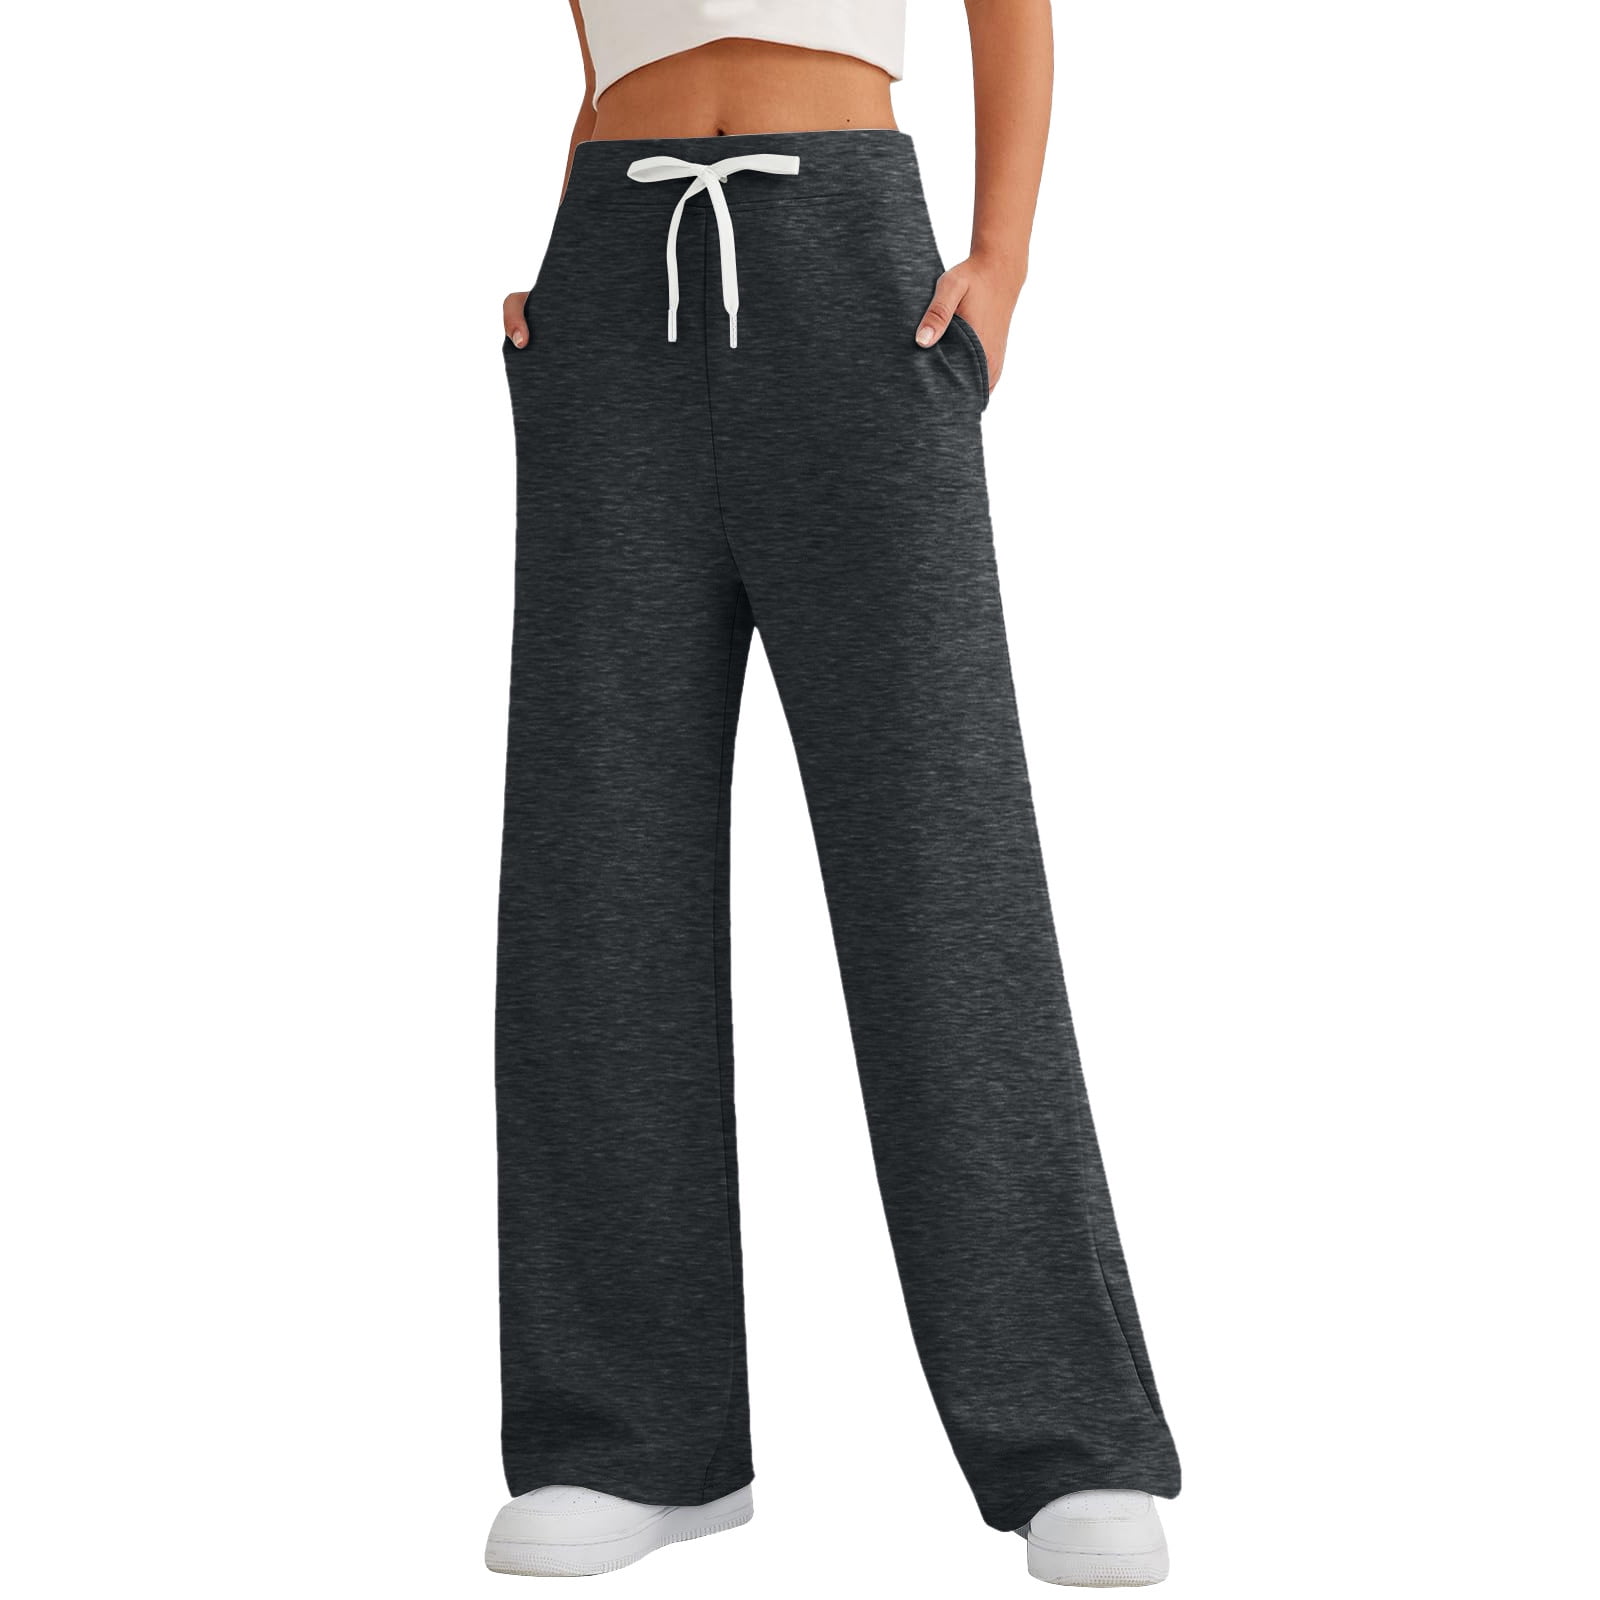 Susanny Plus Size Sweatpants Straight Leg Fleece Lined High Waisted Petite  Joggers Pants Baggy Casual Drawstring with Pockets Long Cotton Sweatpants